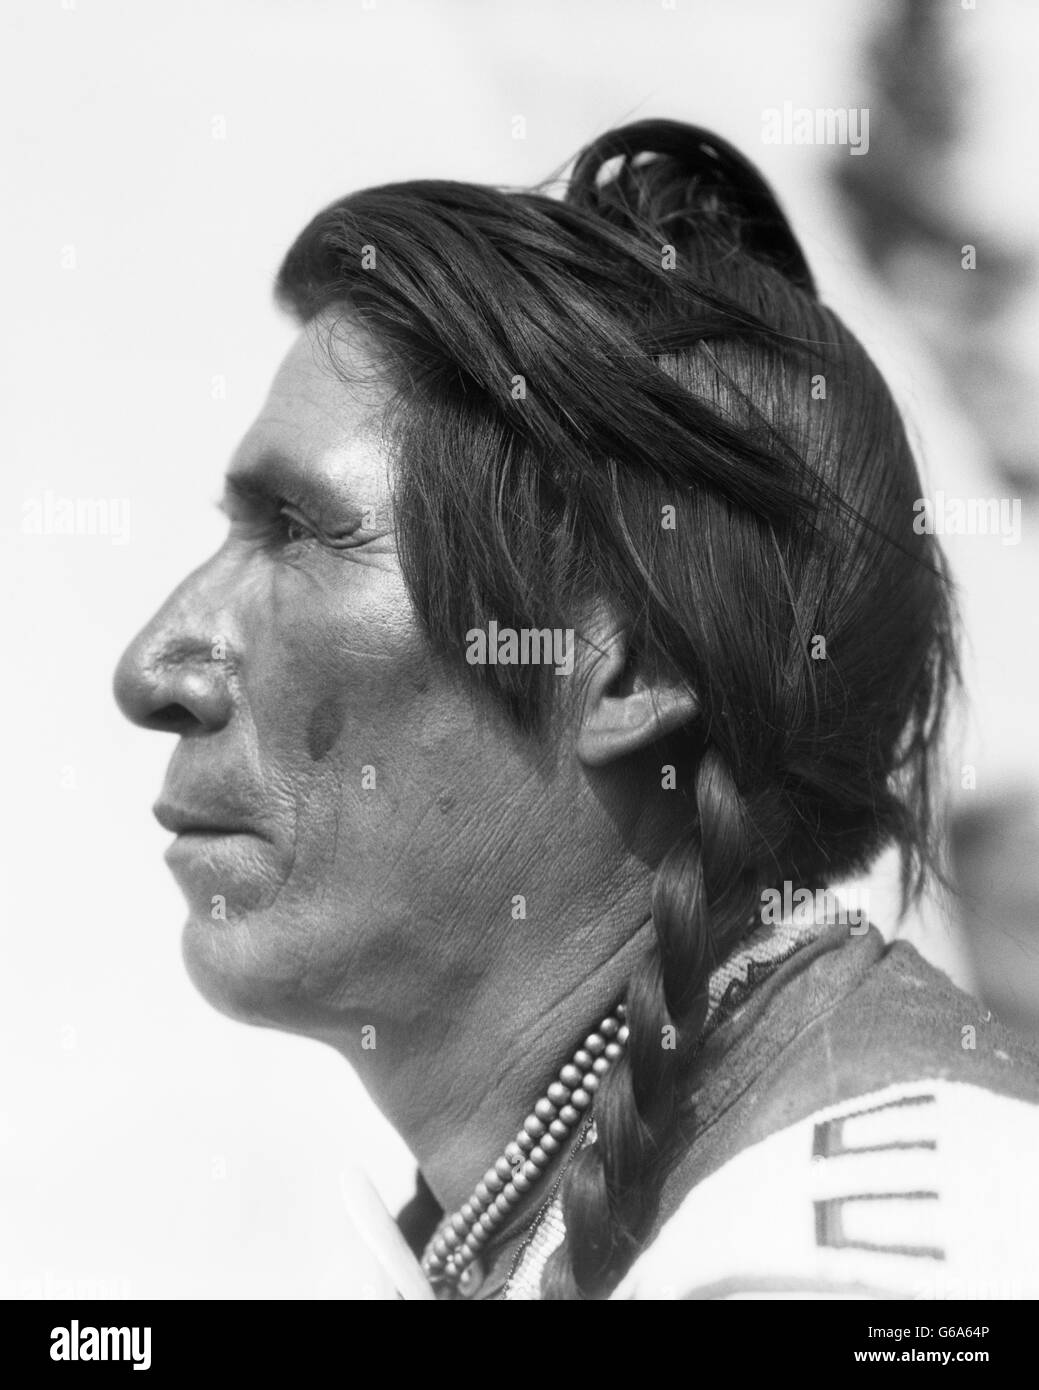 1920s PROFILE PORTRAIT OF CHIEF SITTING EAGLE NATIVE AMERICAN INDIAN MAN OF STONEY SIOUX TRIBE NEAR BANFF ALBERTA CANADA Stock Photo